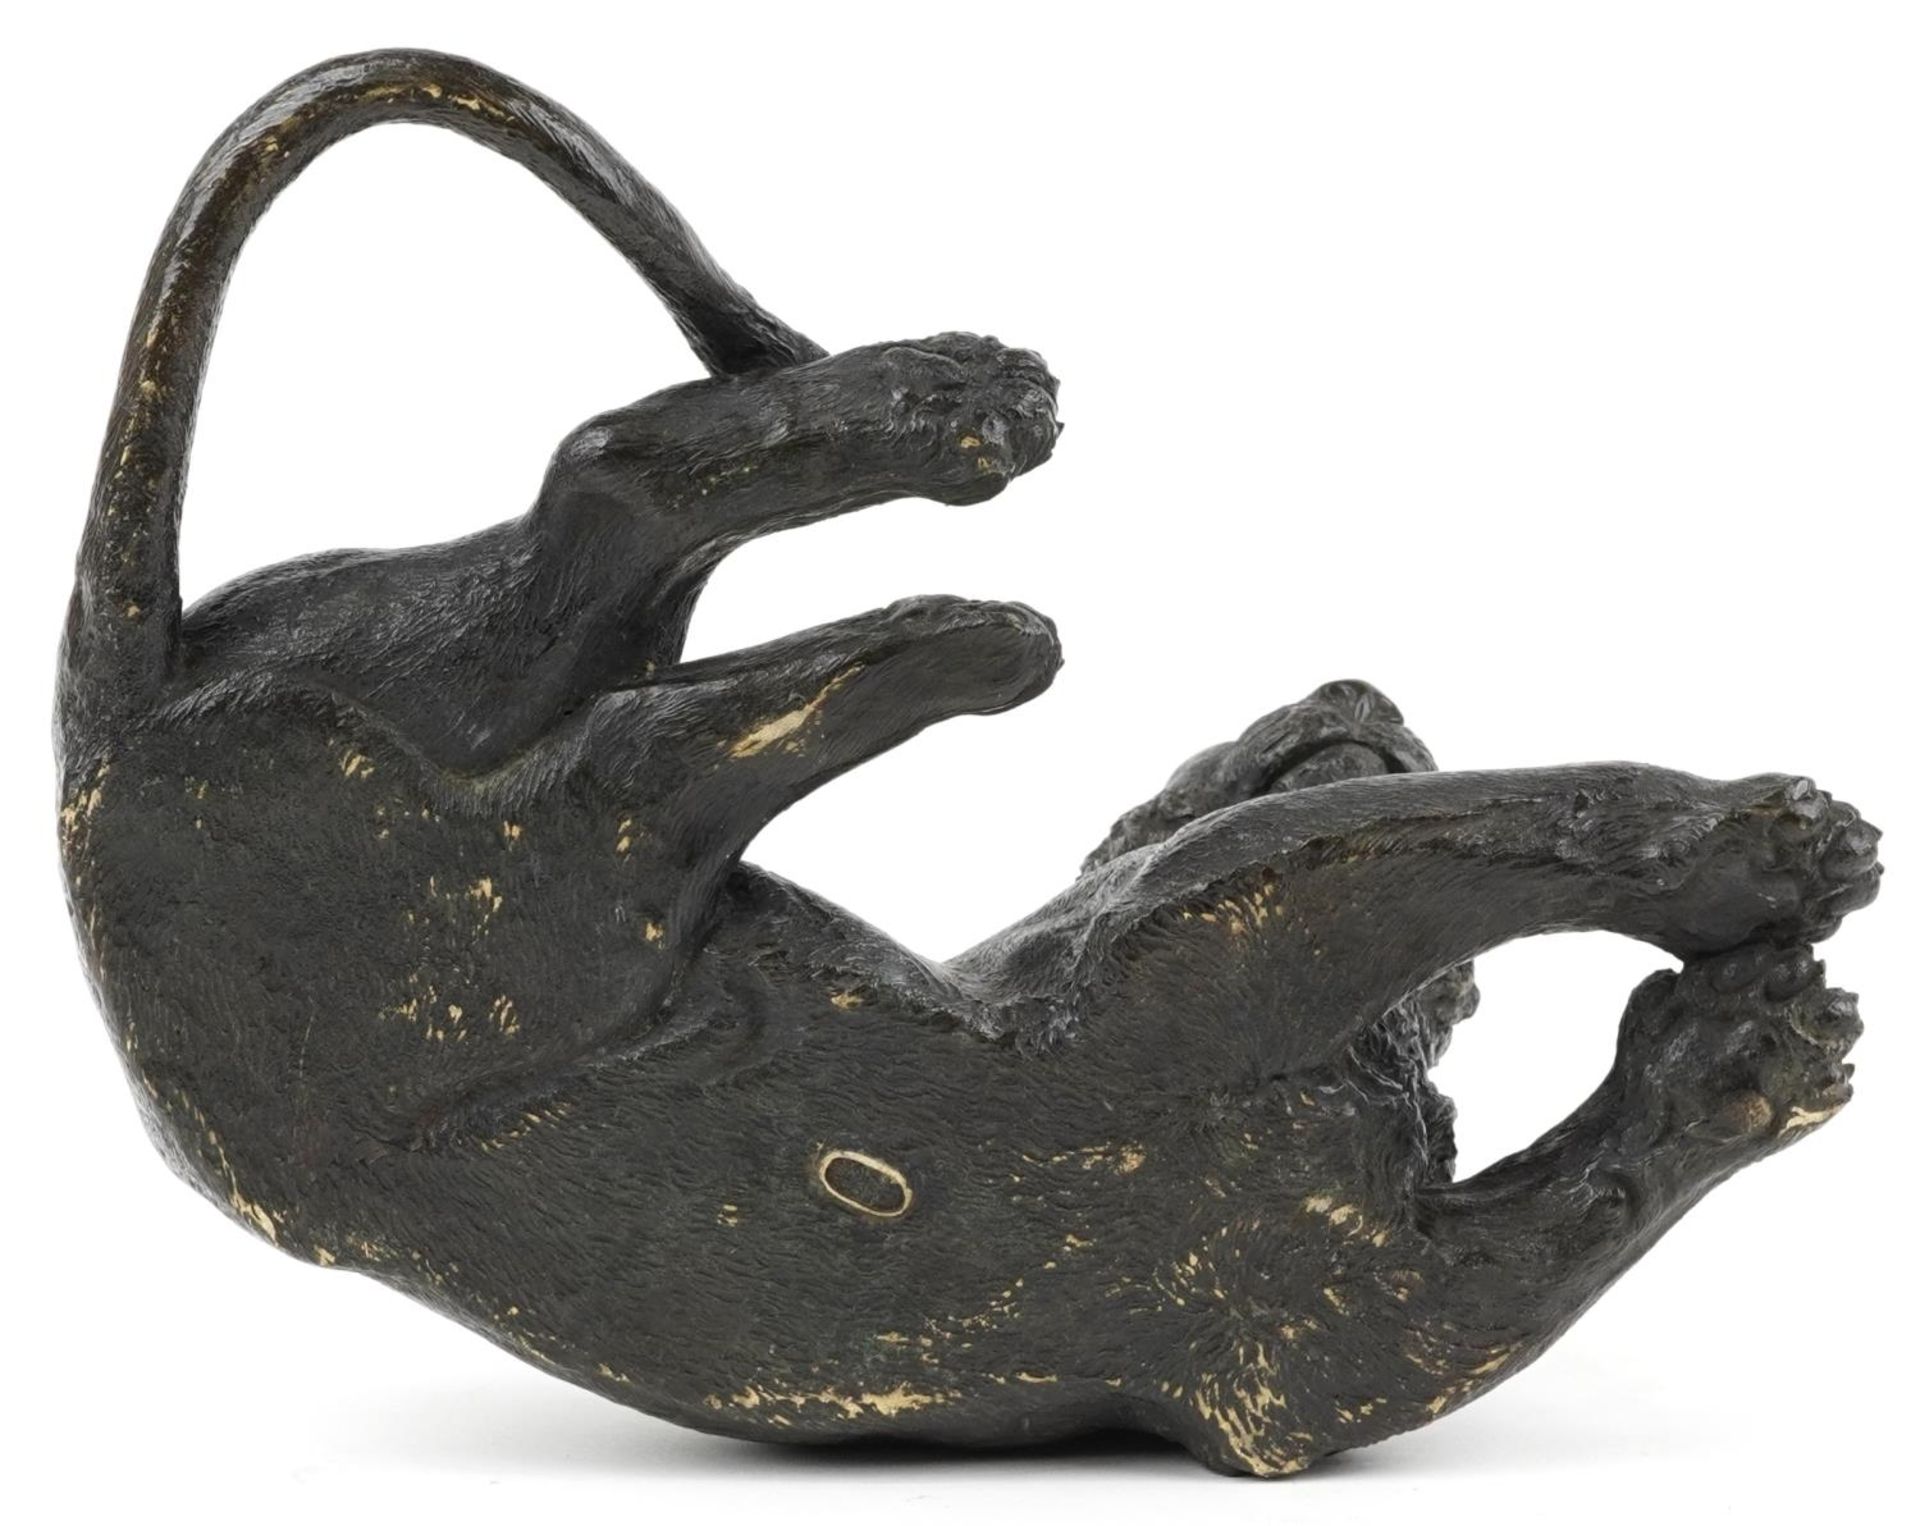 Japanese patinated bronze tiger, Meiji period, character marks to the base, possibly by Kakuha - Image 7 of 8